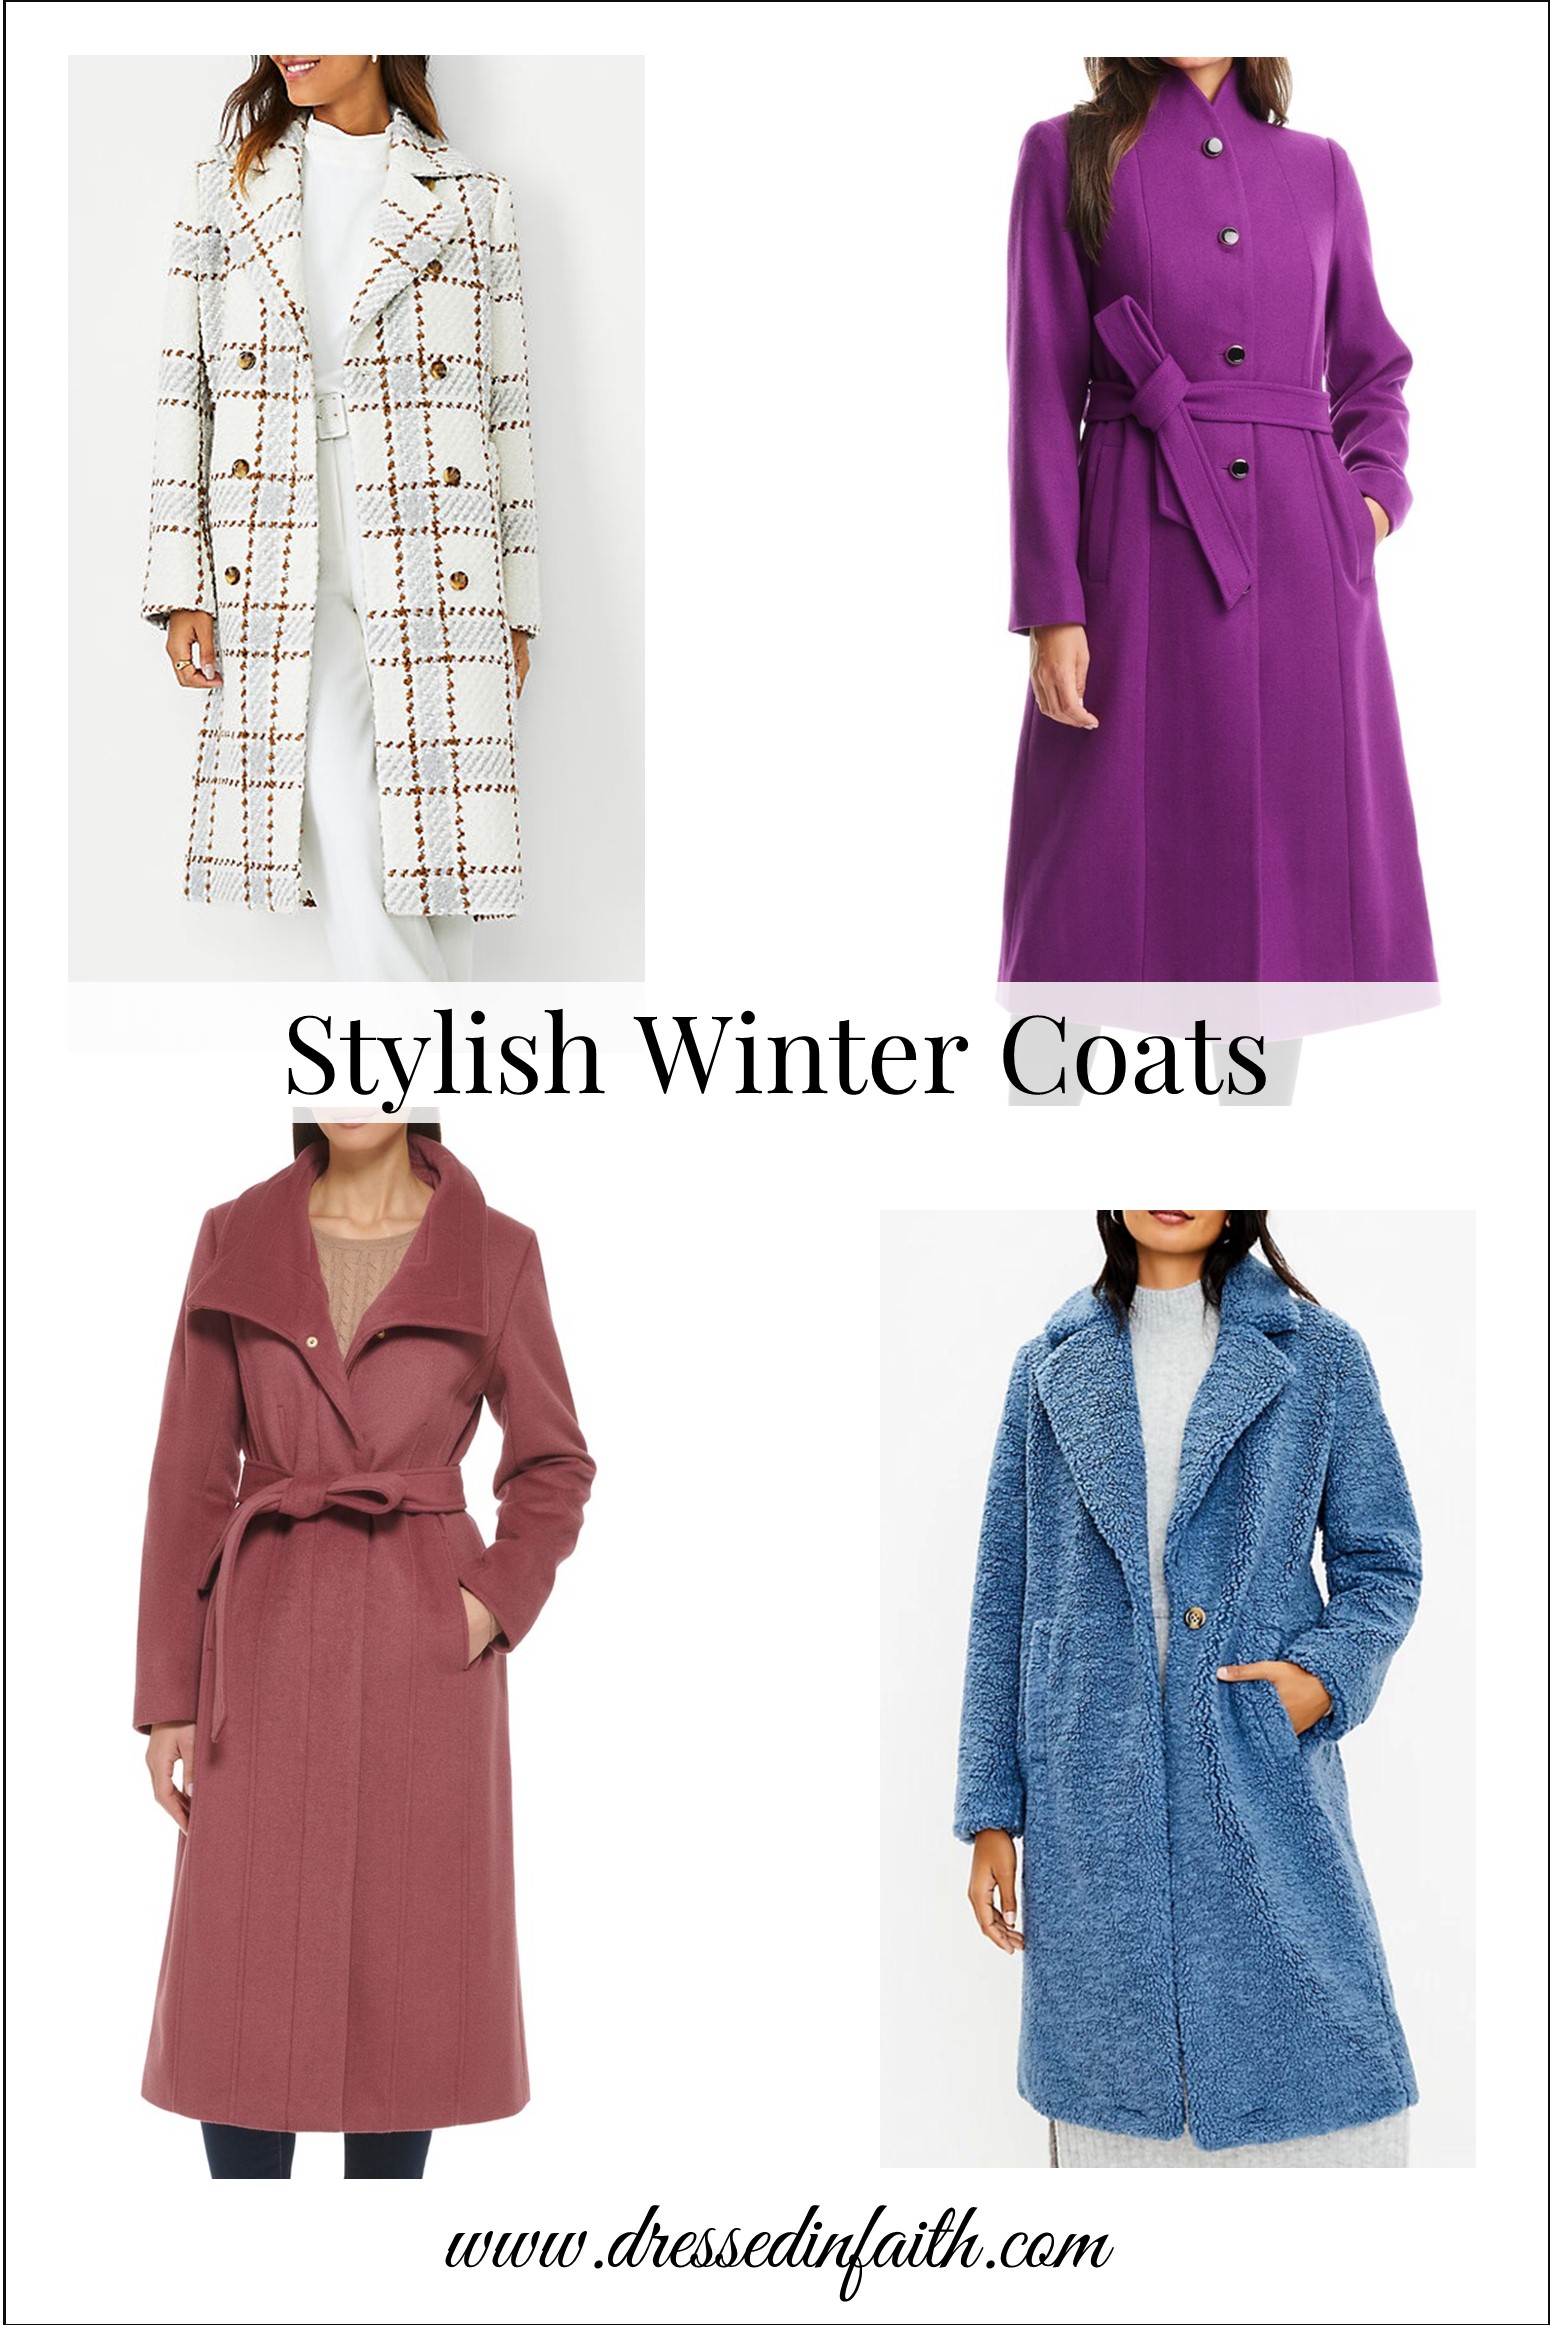 Top 10 Winter Fashion Trends 2021-2022 - Your Classy Look  Stylish winter  coats, Stylish winter outfits, Winter coat trends